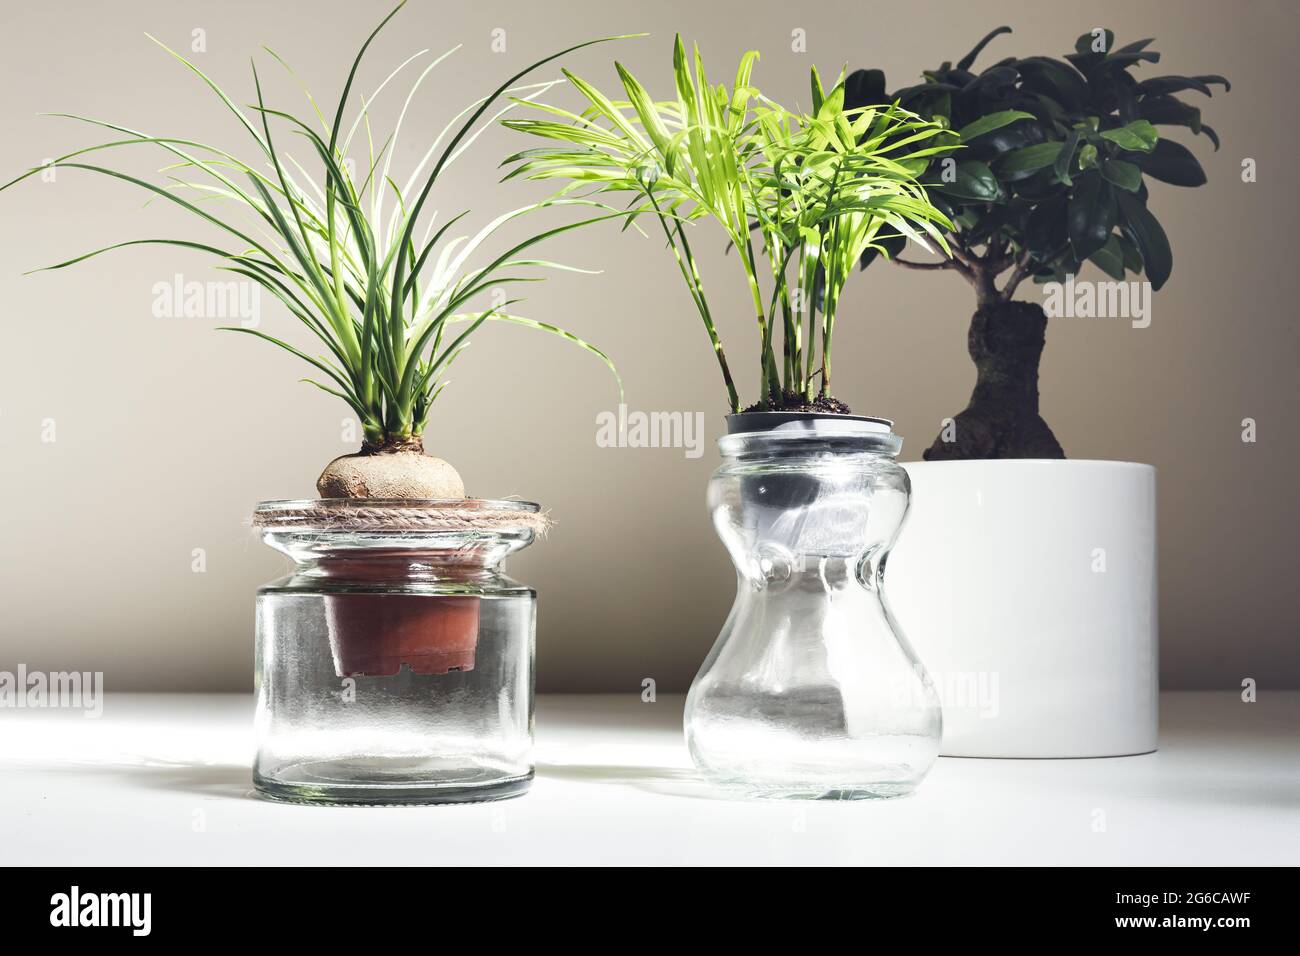 TÌNH YÊU CÂY CỎ ĐV 11   - Page 29 Indoor-plants-beaucarnea-recurvata-chamaedorea-in-glass-jars-and-ficus-ginseng-on-white-table-home-gardening-concept-2G6CAWF